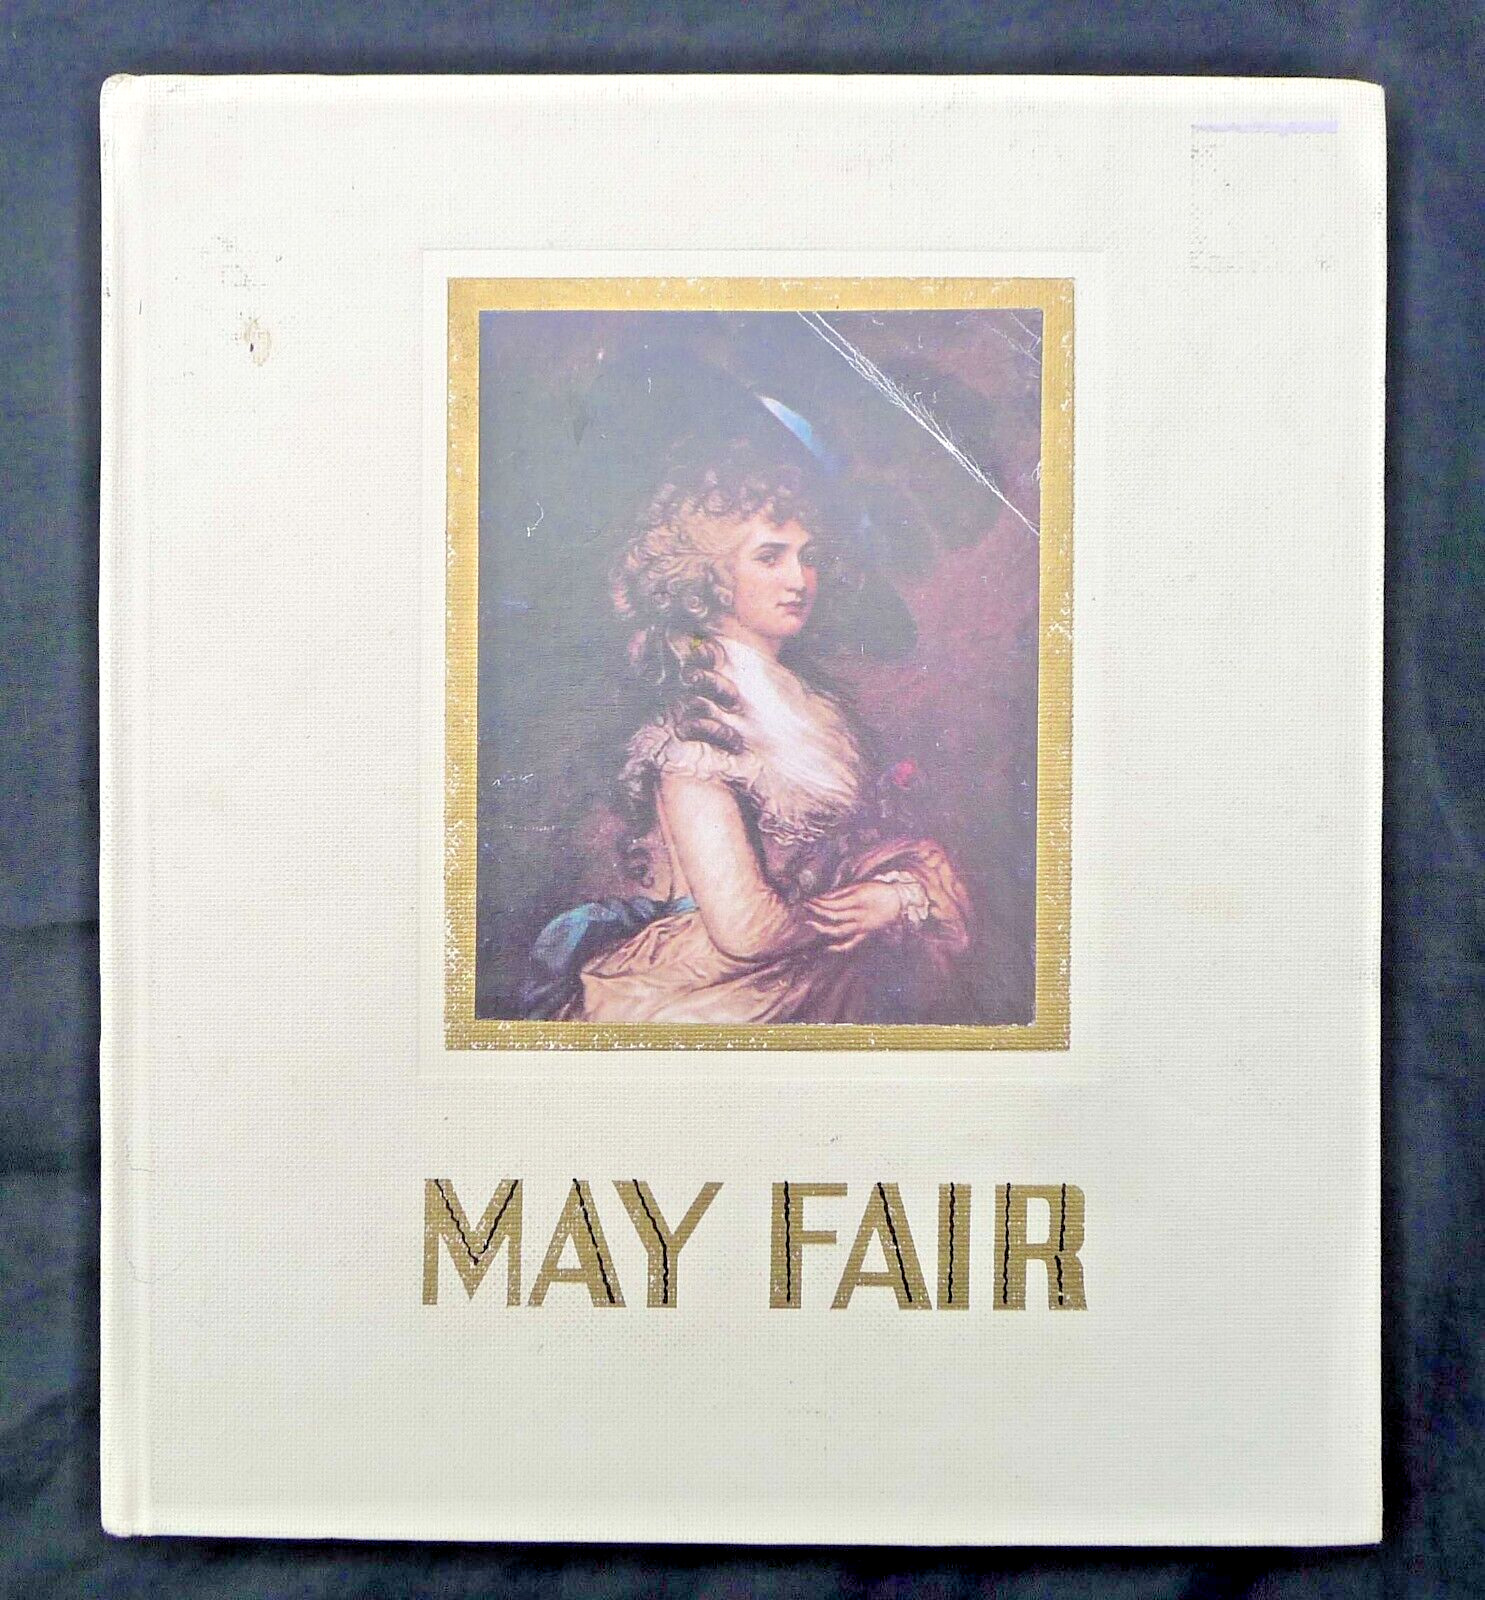 THE MAYFAIR HOTEL BOOK, 1977 50th ANNIVERSARY FACSIMILE OF THE 1927 EDITION.